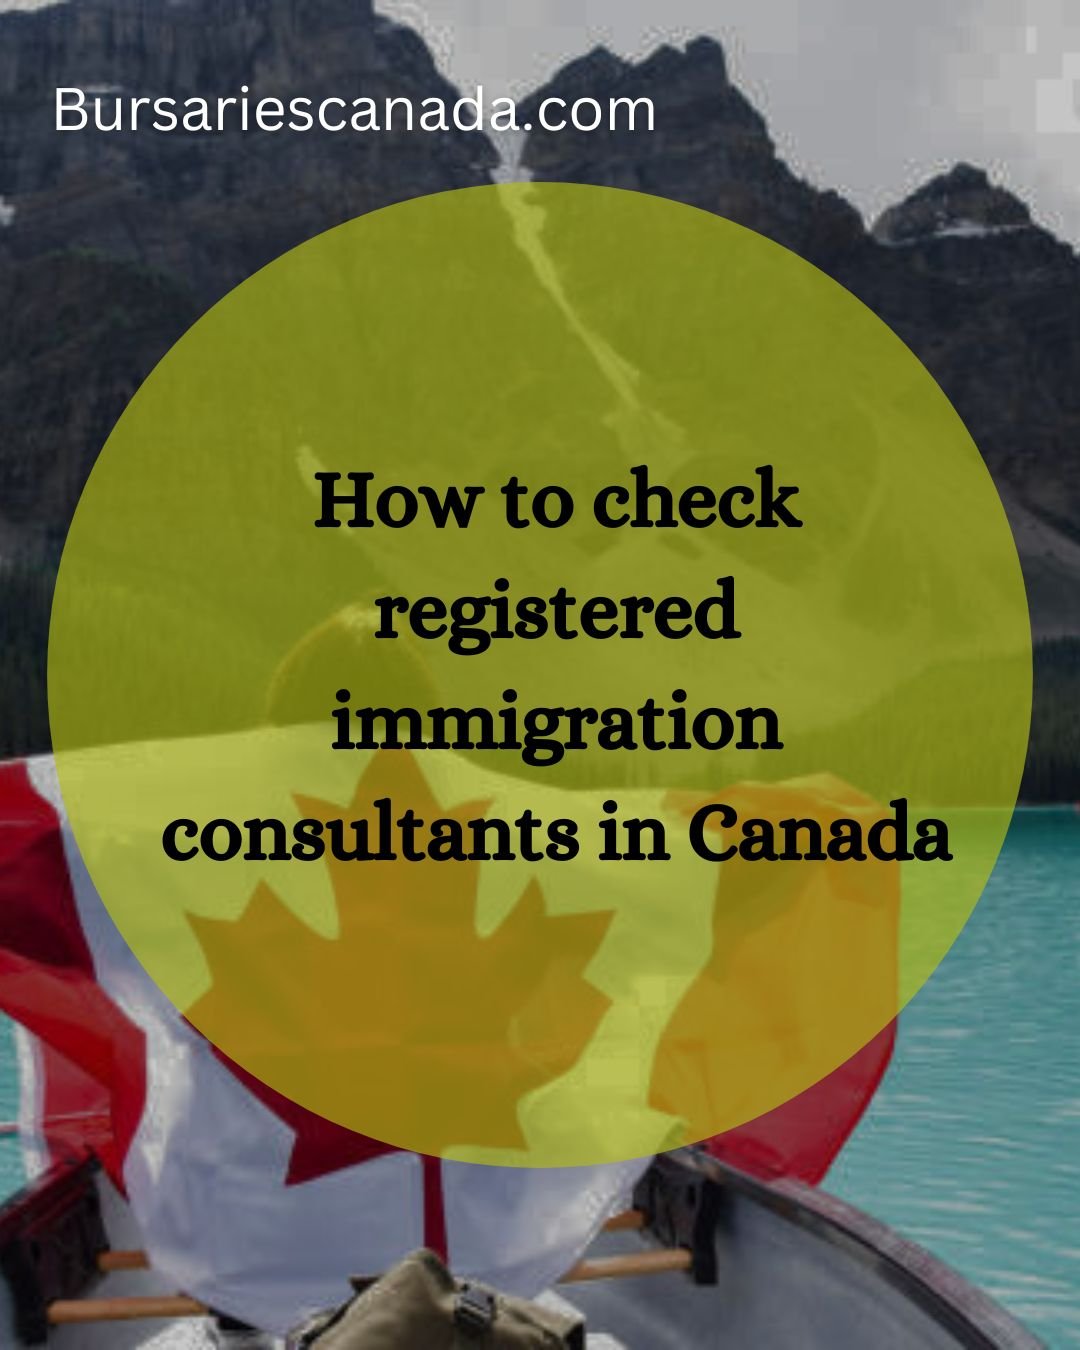 How to check registered immigration consultants in Canada